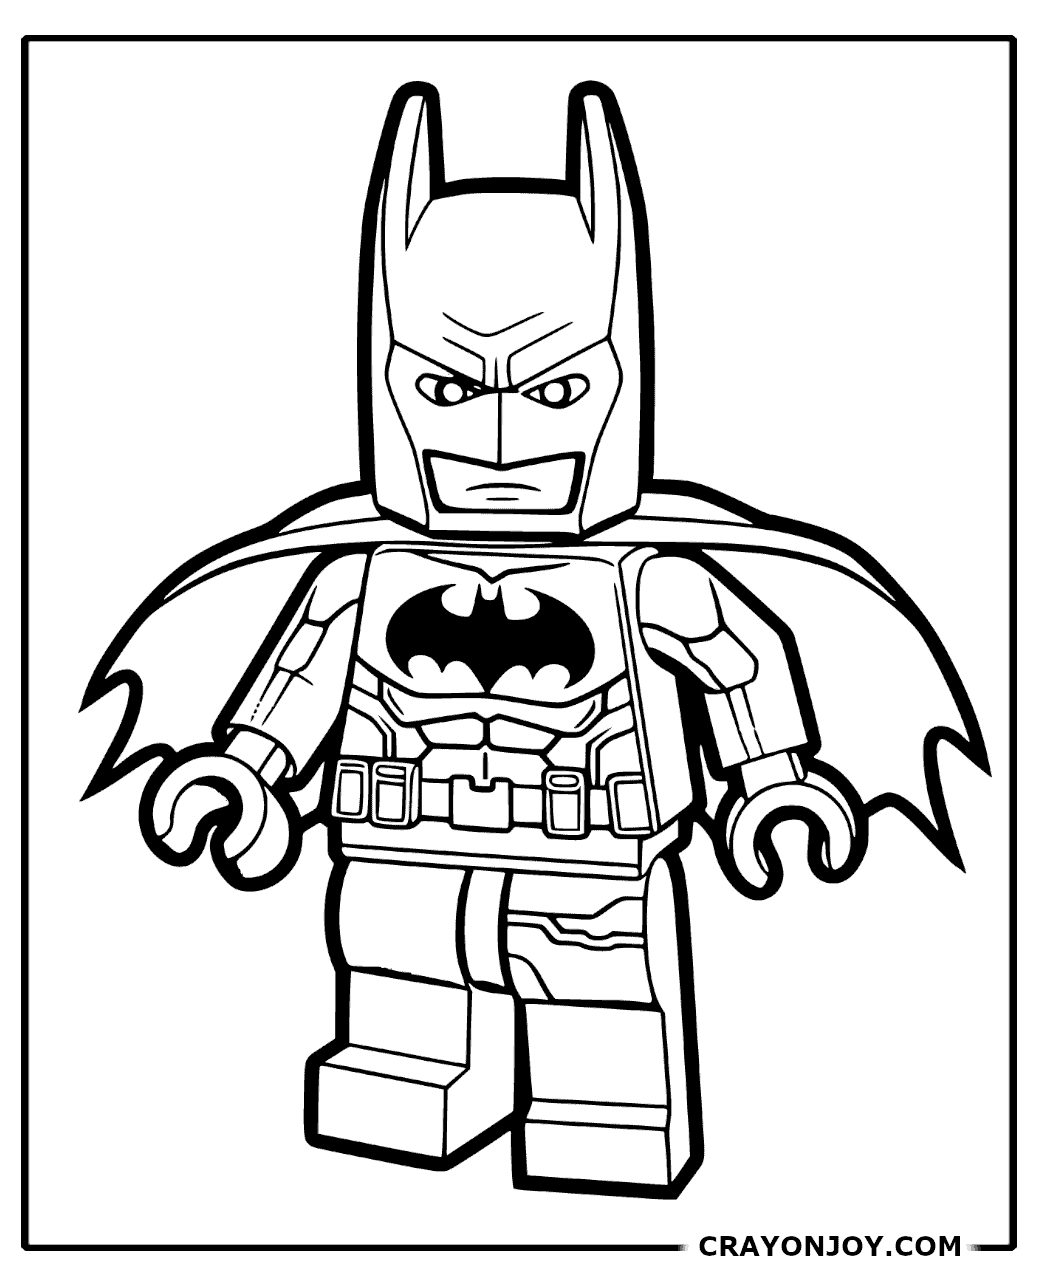 Free Printable Lego Batman Coloring Pages for Kids and Adults